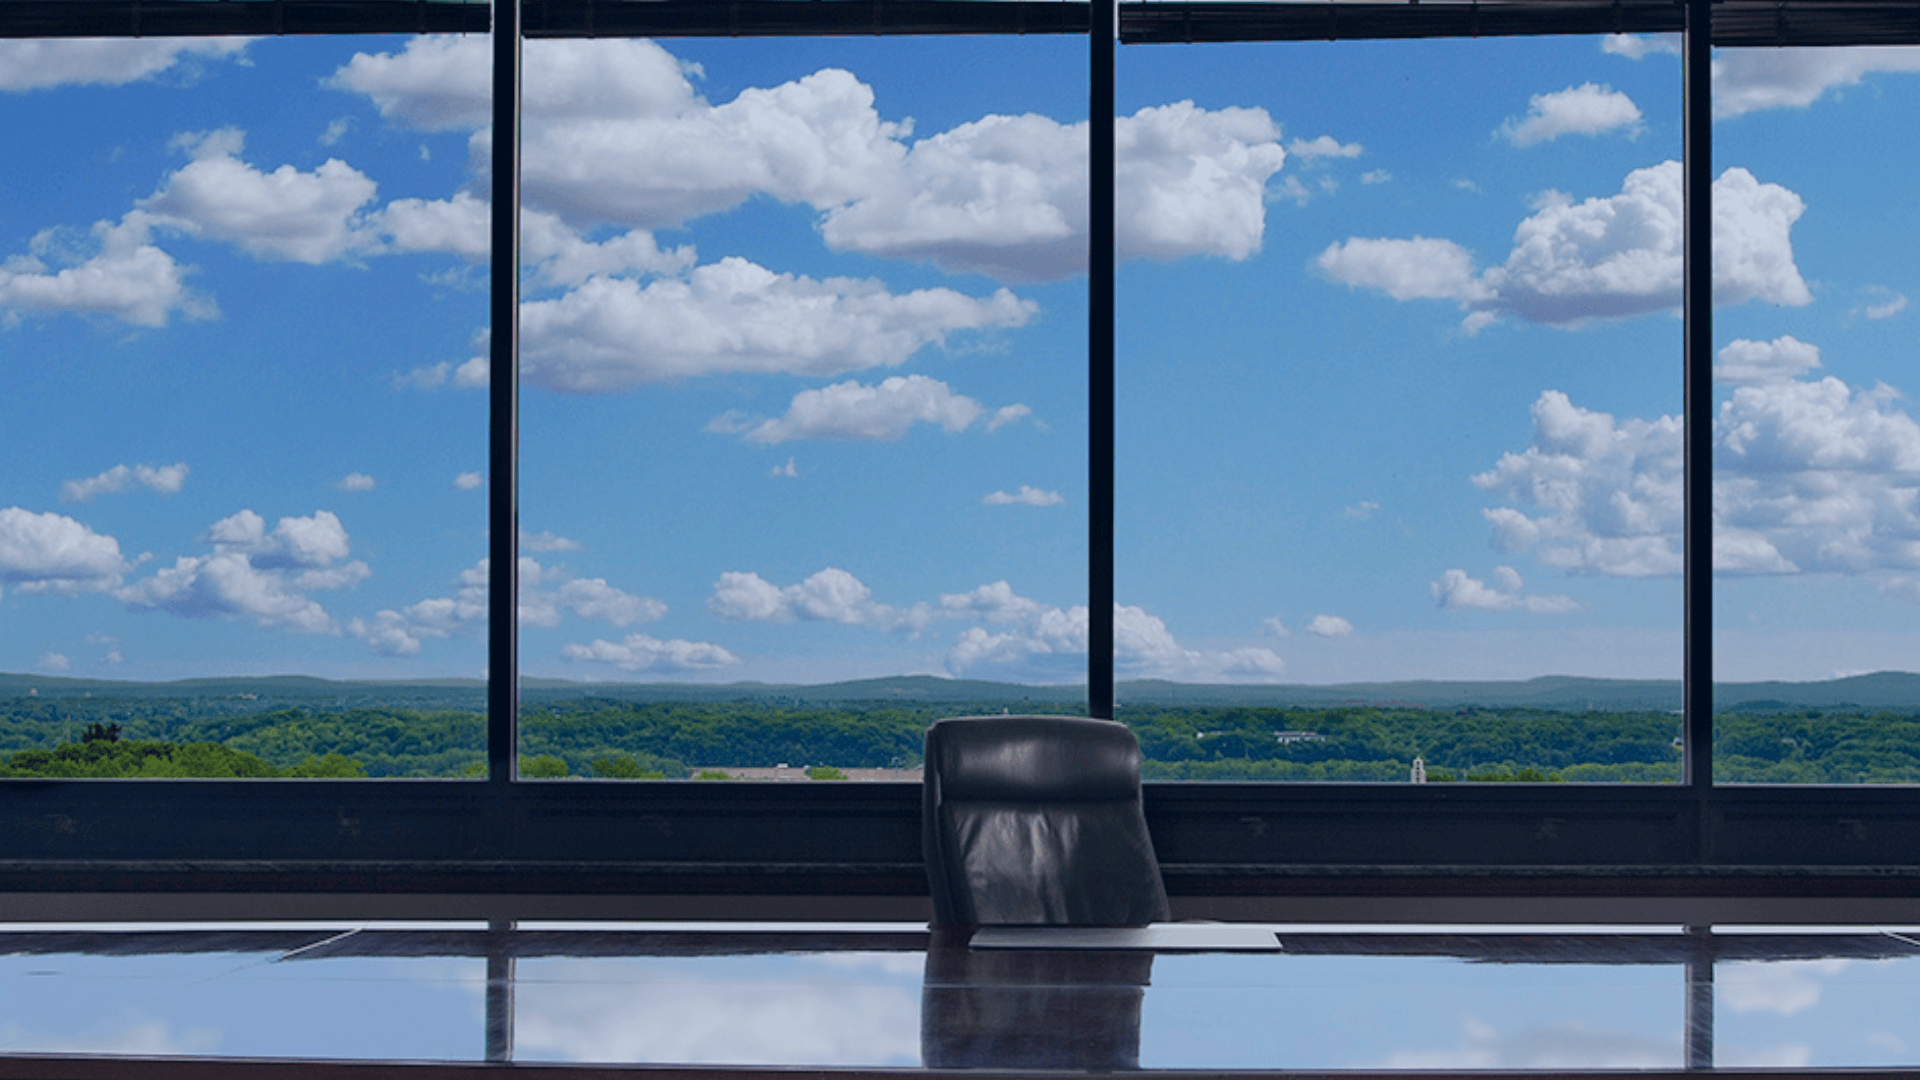 A view out the east-facing windows of MBK's board room looking out at a blue sky and Pioneer Valley